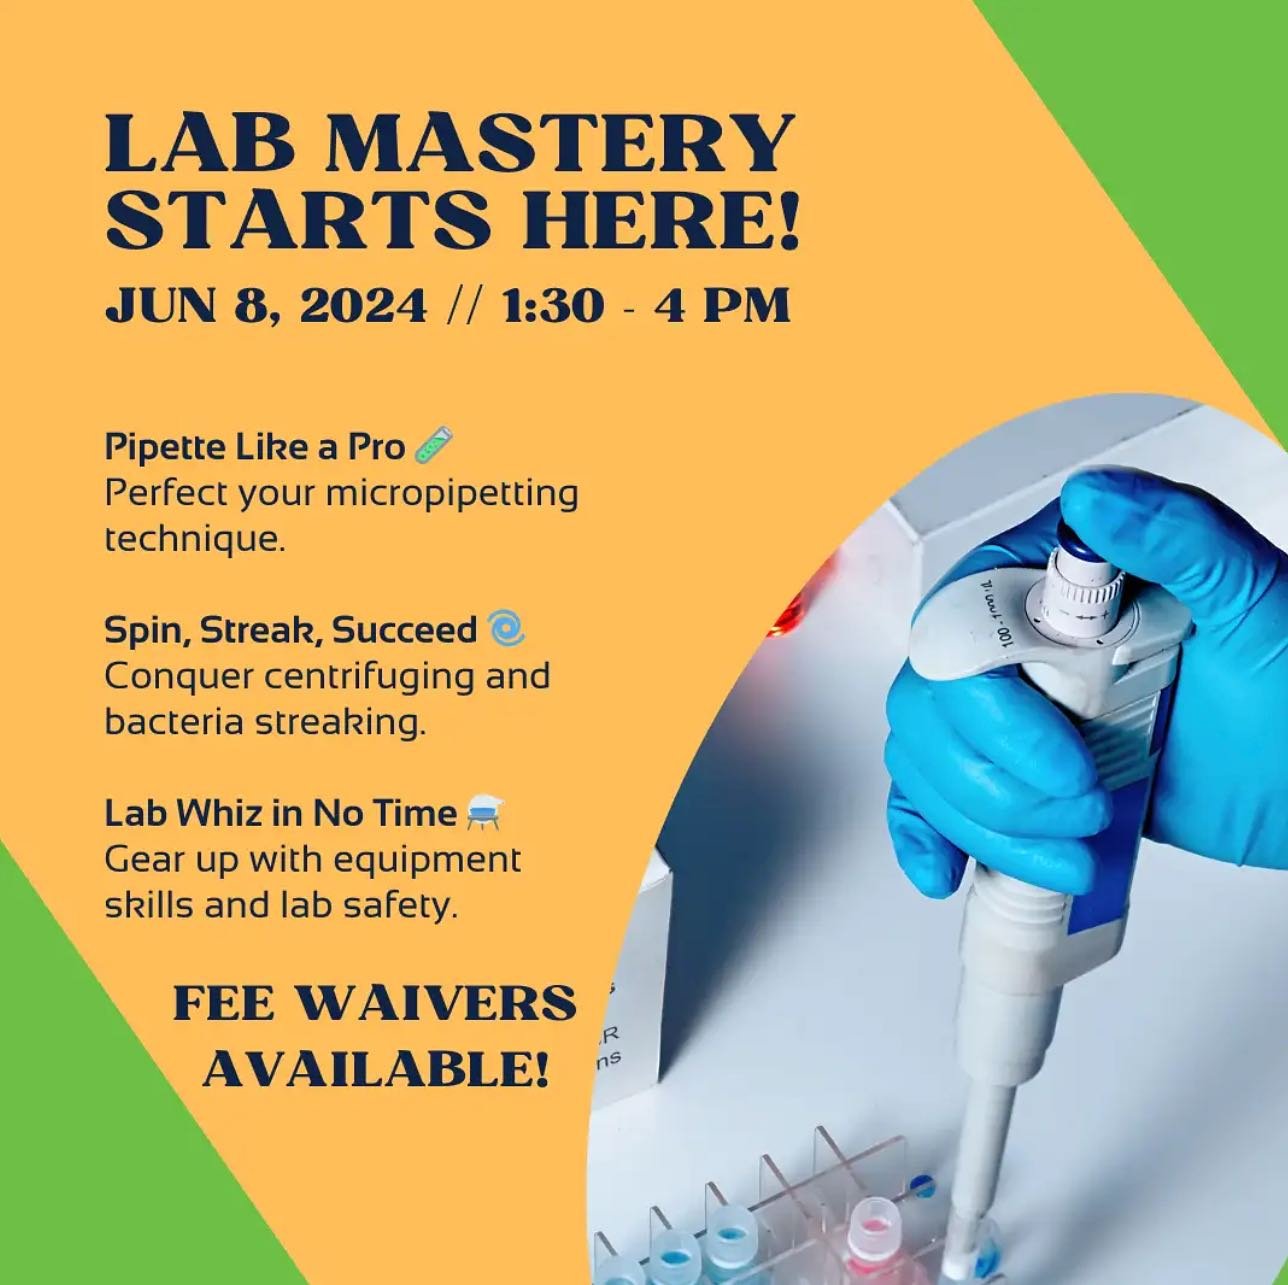 Another amazing opportunity to learn and practice some useful skills in our lab in downtown Seattle! Mark the date ‼️#lablove #biotec #micropipette #biology #fun